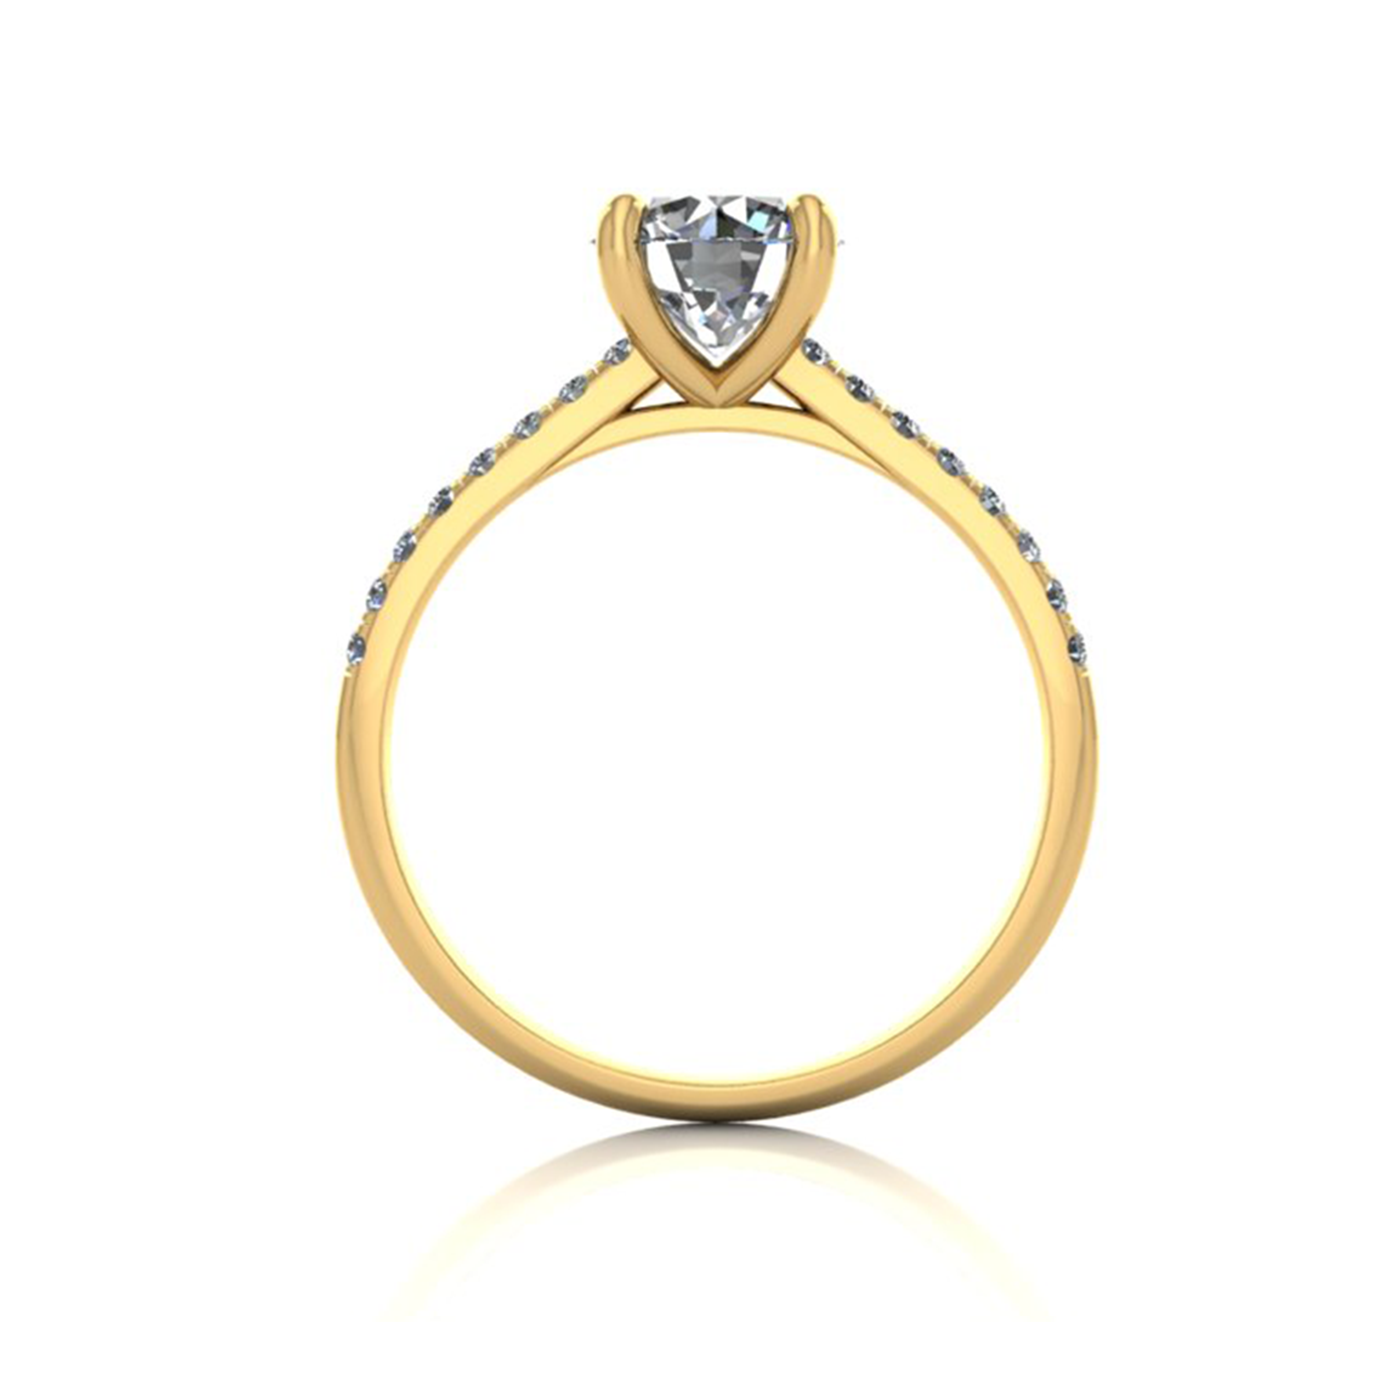 18k yellow gold 1.0ct 4 prongs round cut diamond engagement ring with whisper thin pavÉ set band